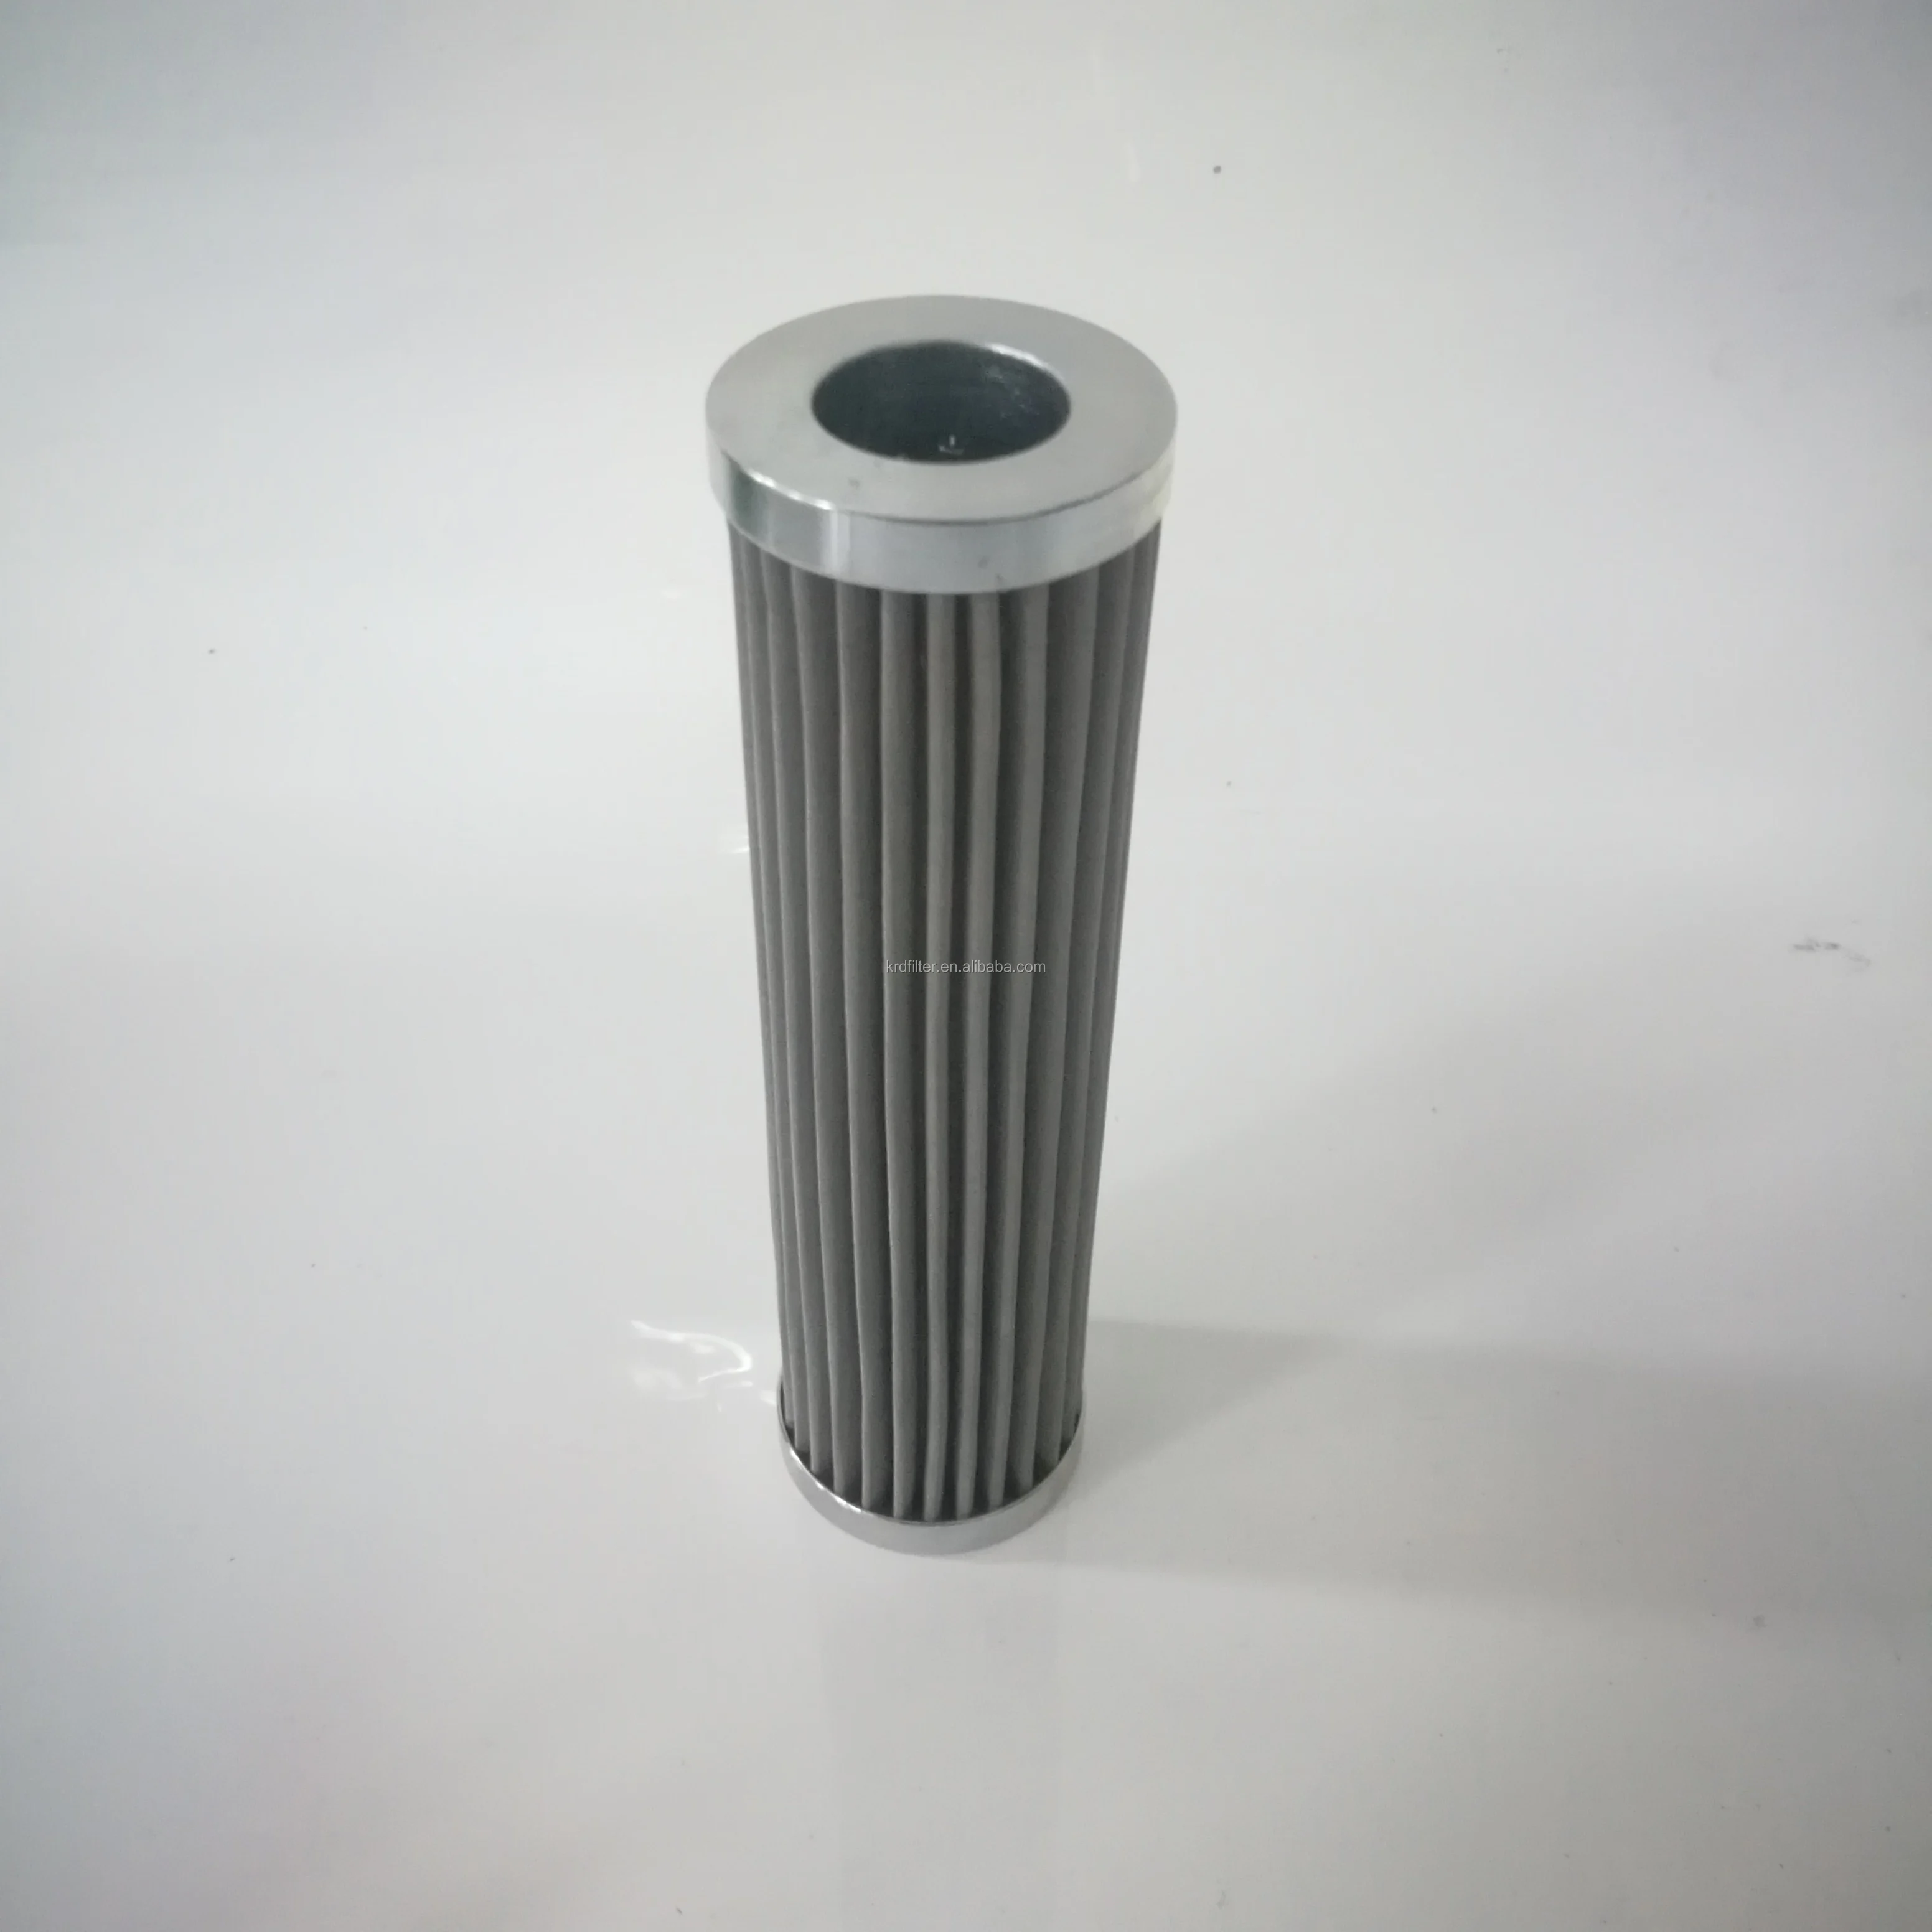 Long-term supply cartridge Hydraulic Oil Filter cross reference 05.8900.6VG.10.E.P.16